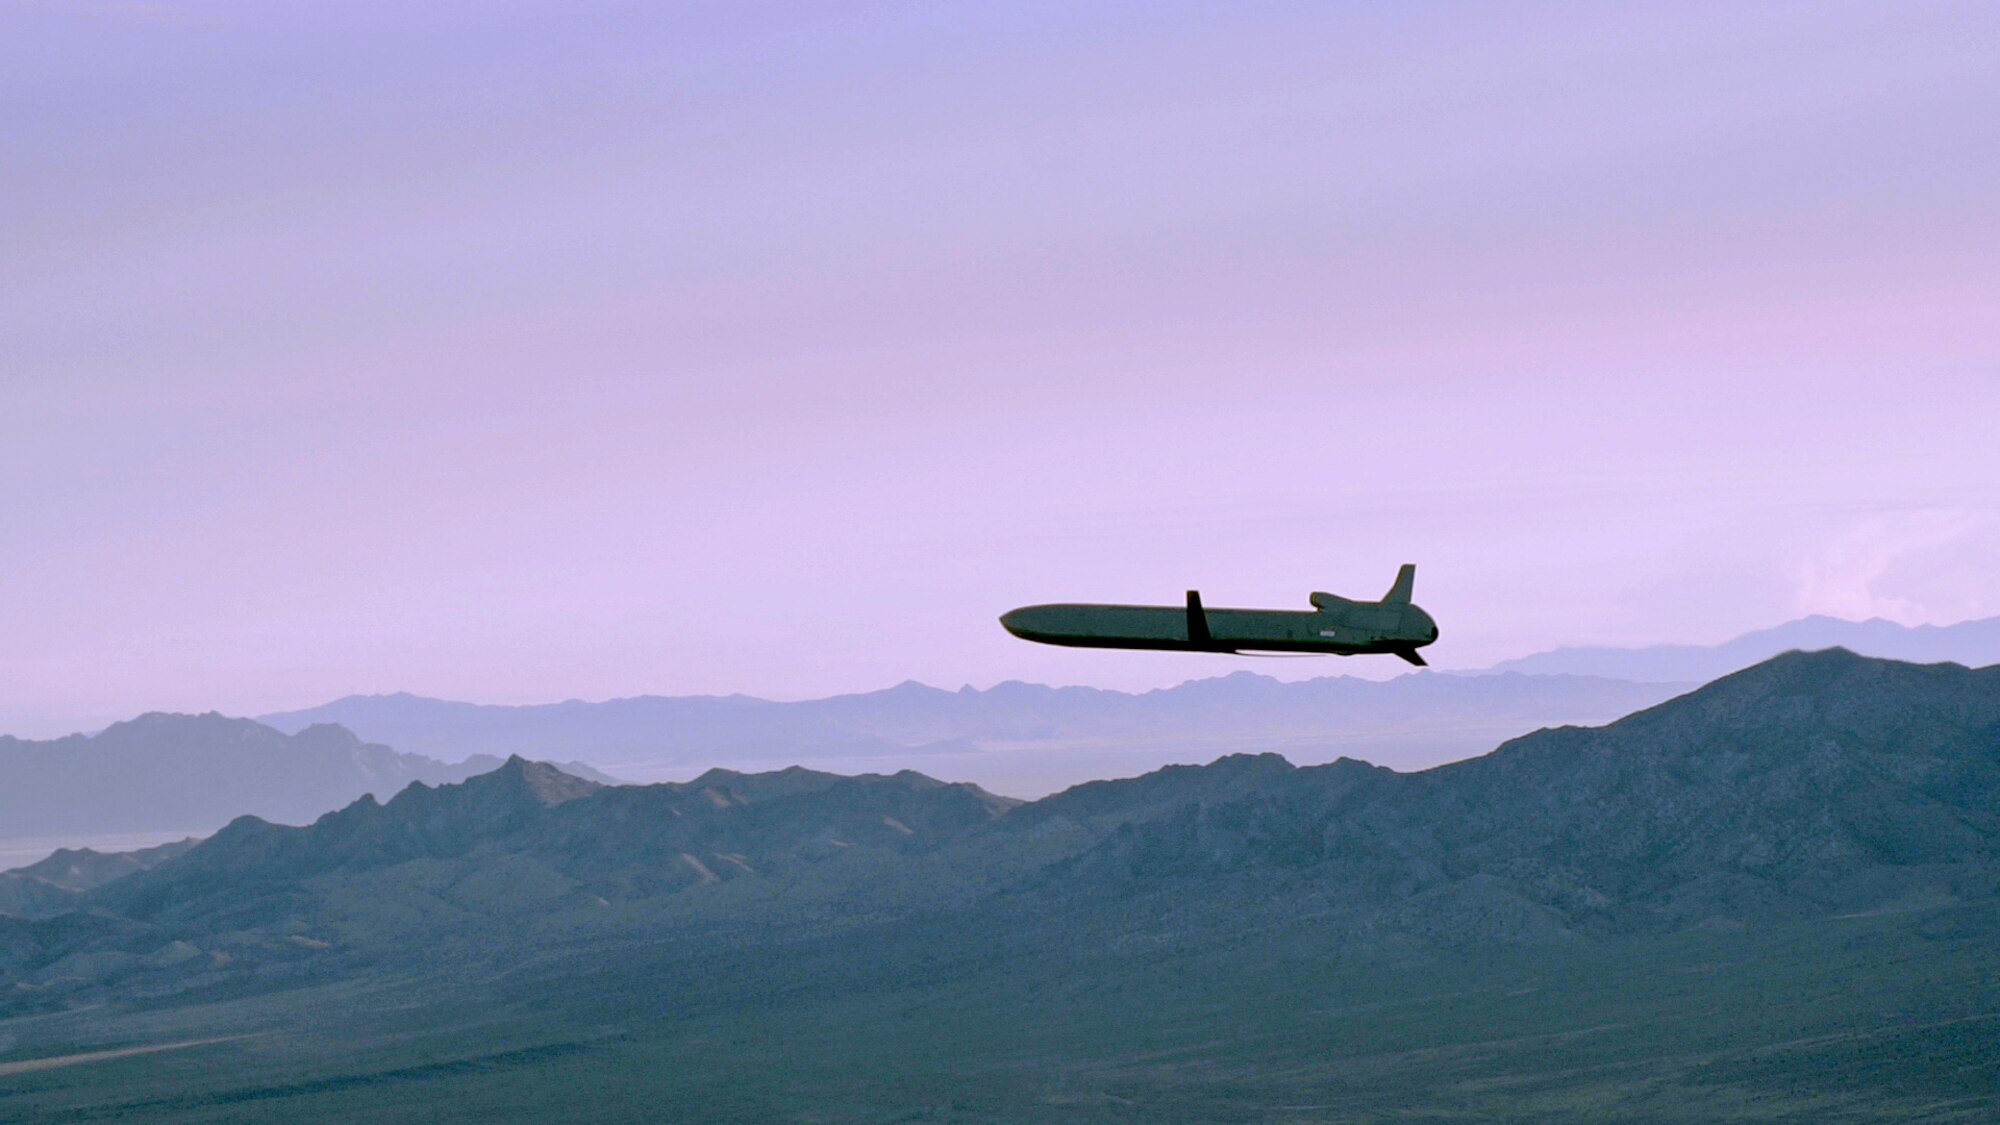 An unarmed AGM-86B Air-Launched Cruise Missile maneuvers over the Utah Test and Training Range en route to its final target during a Nuclear Weapons System Evaluation Program simulated combat mission Sept. 22, 2014. The ALCM, released from a B-52H Stratofortress flown by the 2nd Bomb Wing, Barksdale Air Force Base, Louisiana, was part of an end-to-end operational evaluation of 8th Air Force and Task Force 204’s ability to deliver the weapon from storage to its final target. (Photo by Staff Sgt. Roidan Carlson)